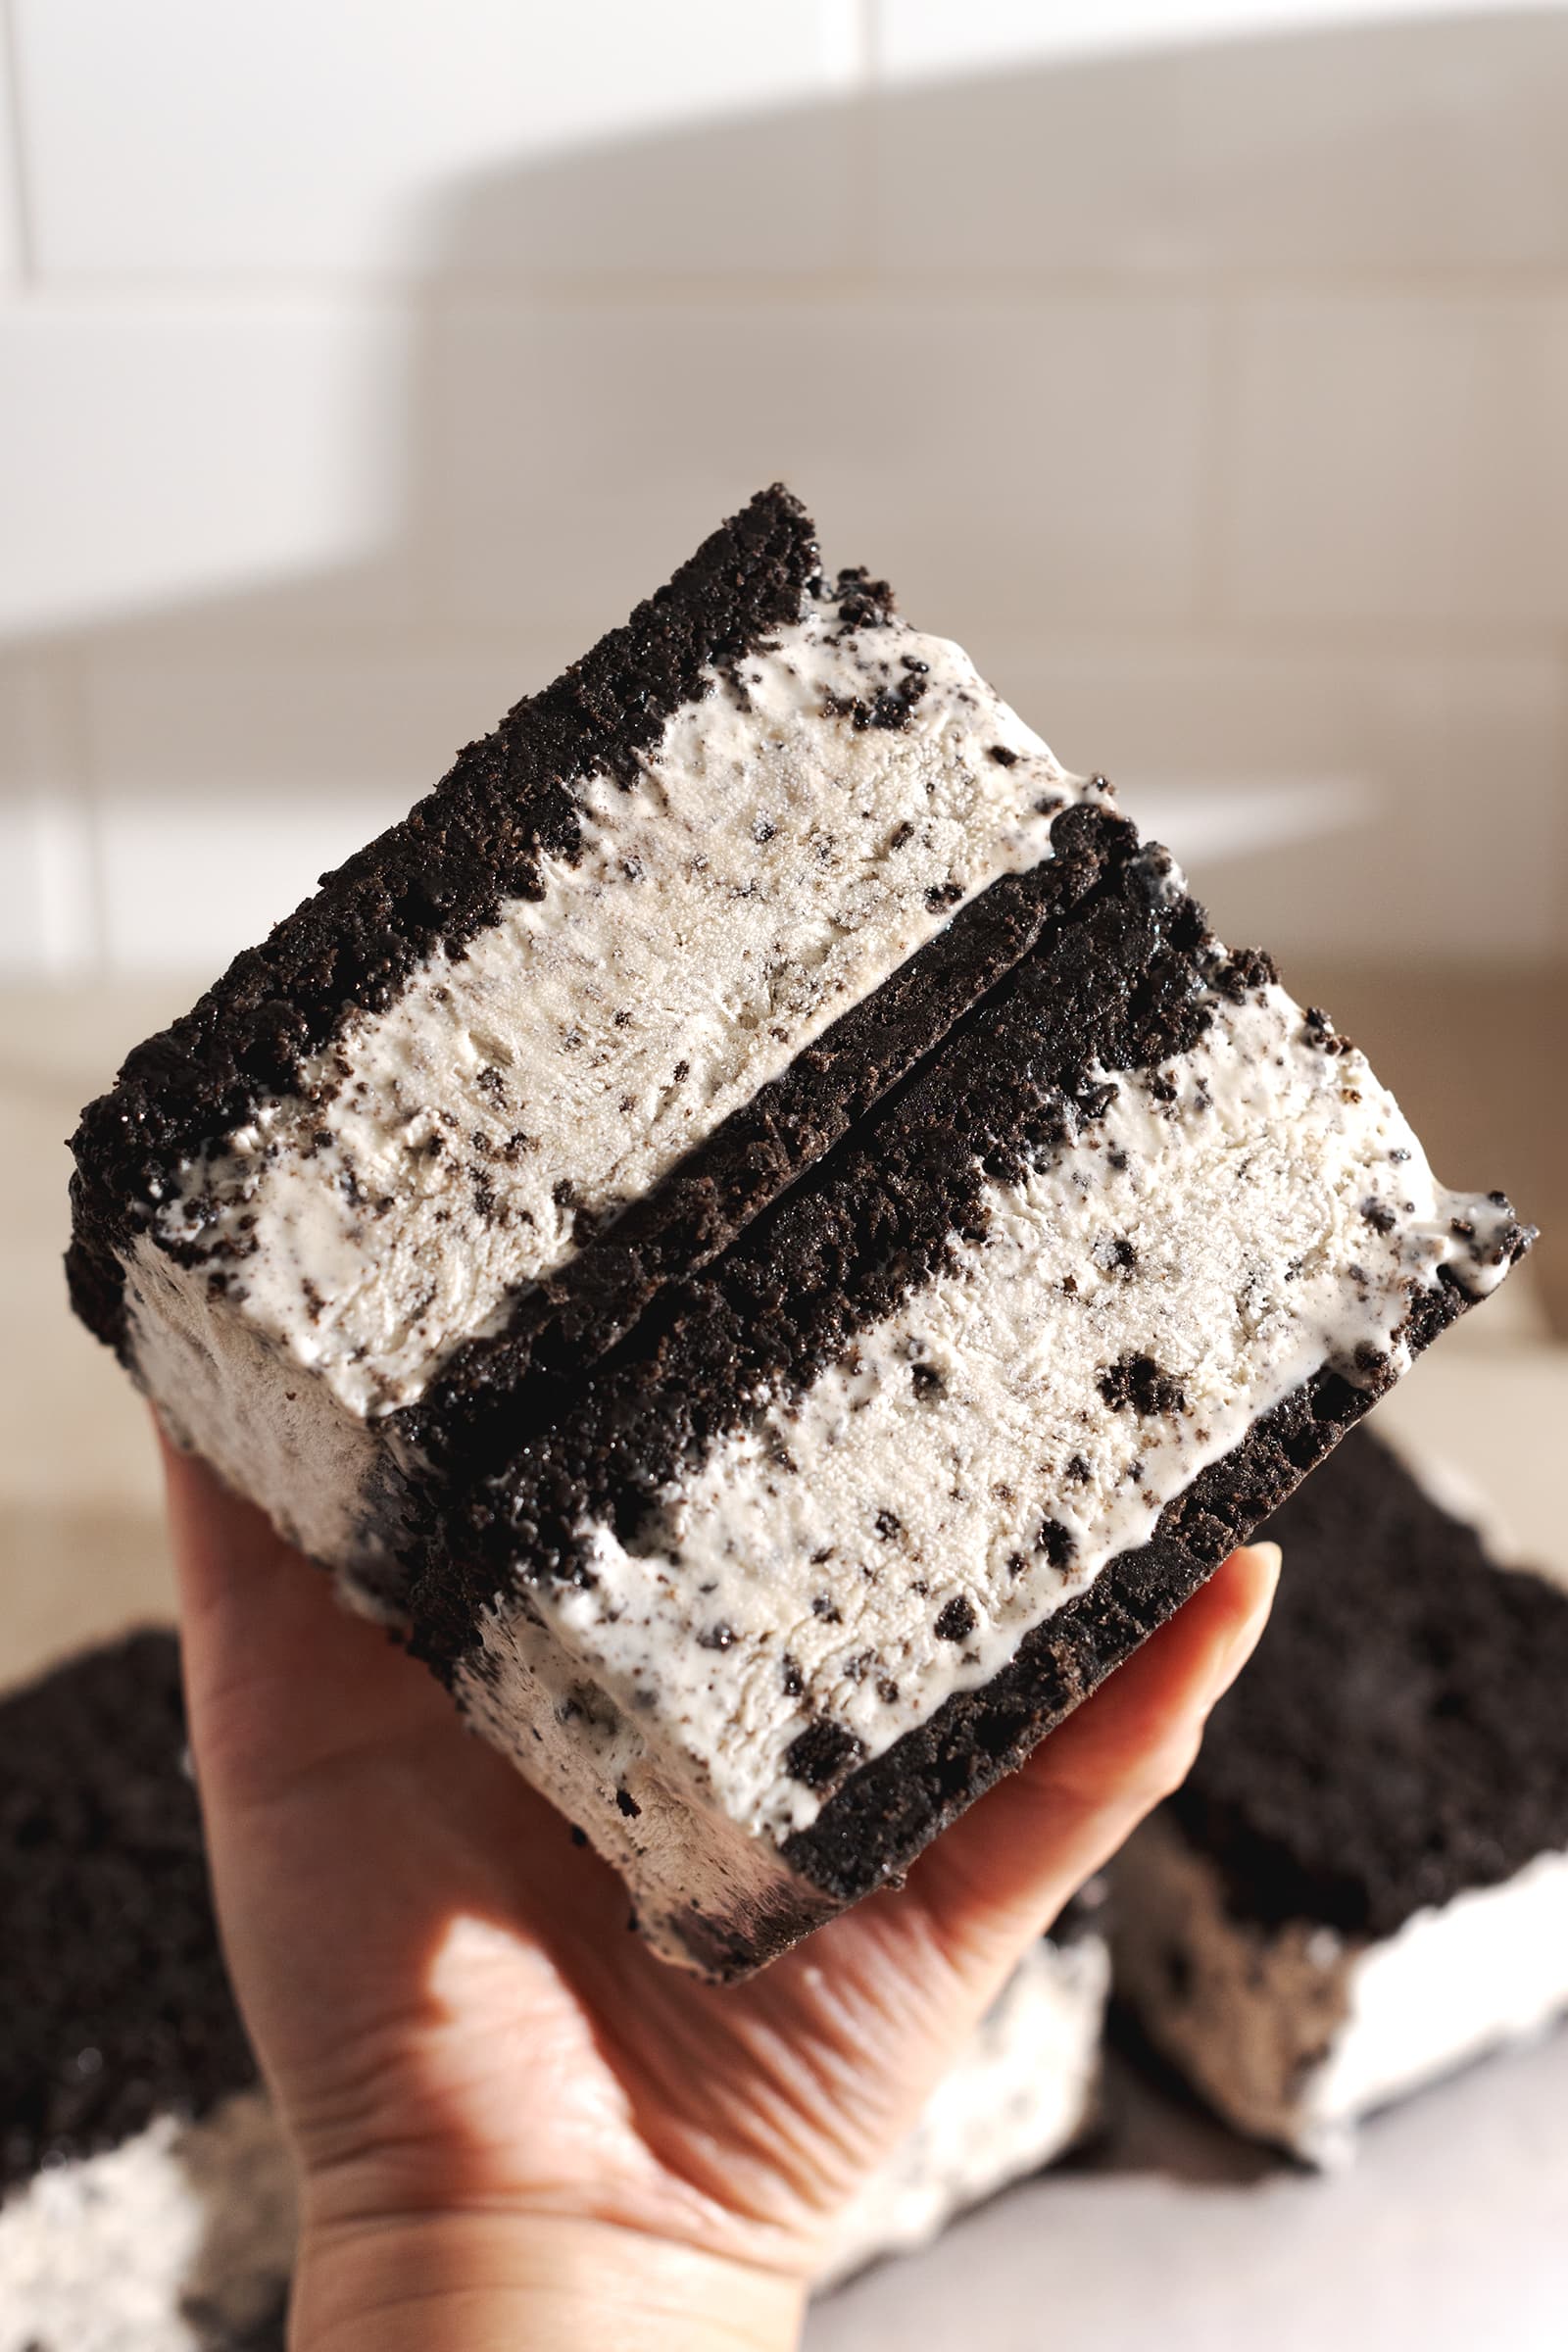 Hand holding a stack of two oreo ice cream sandwiches to show the layers.